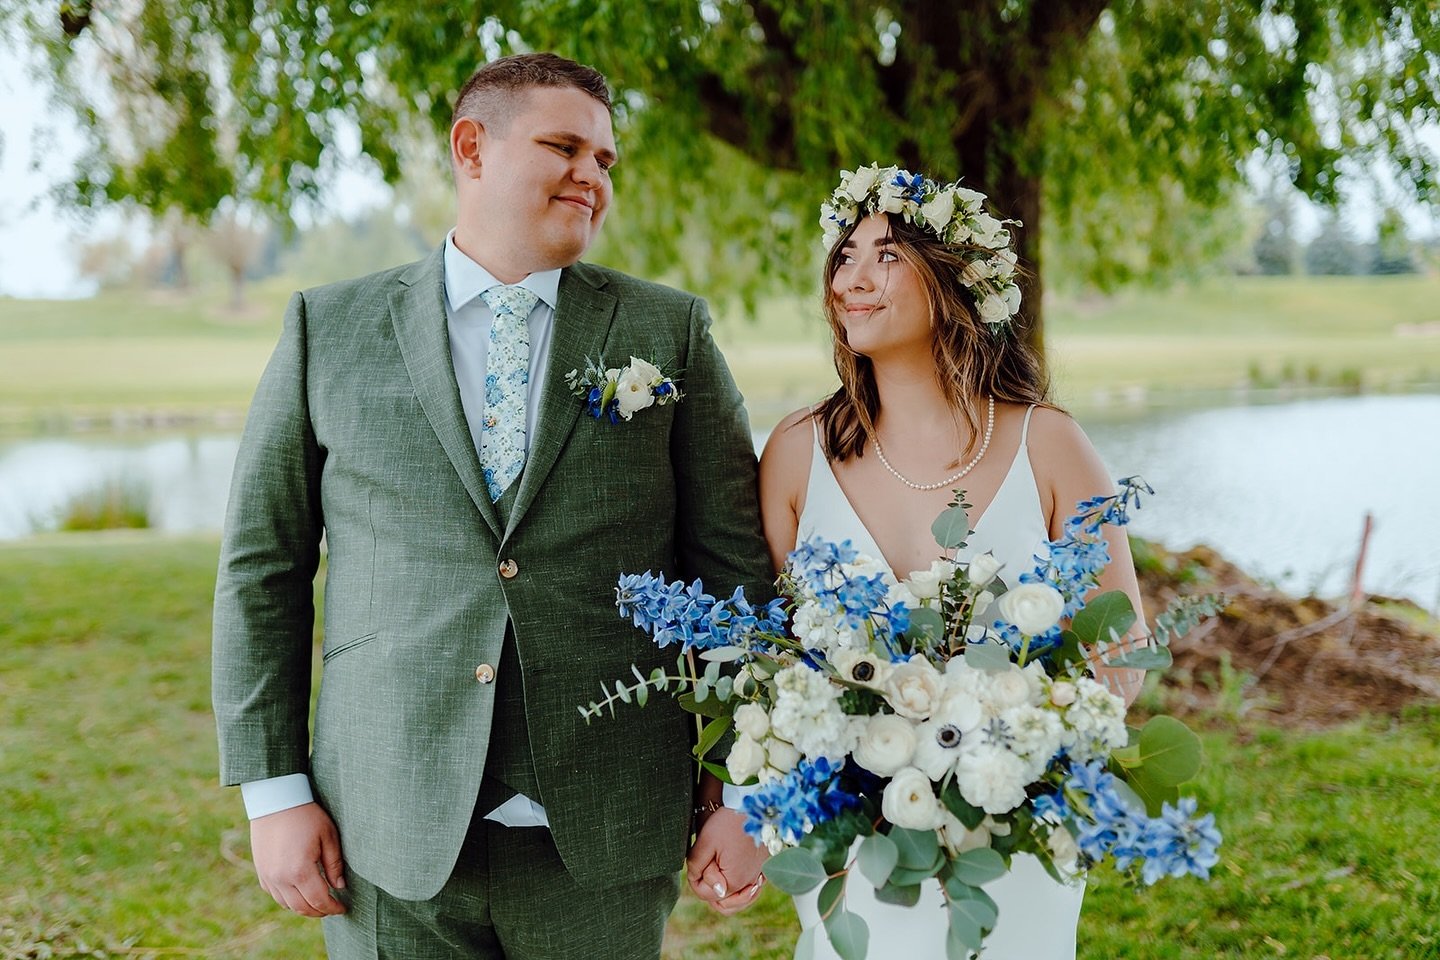 Springing into love with blooming florals and enchanting themes 🌸💍 Let nature be our muse as we craft your dream wedding!

Check out our amazing vendor team below:
Planning - @inthedetailscompany 
Venue - @langdonfarmswedding 
Photography - @lindse